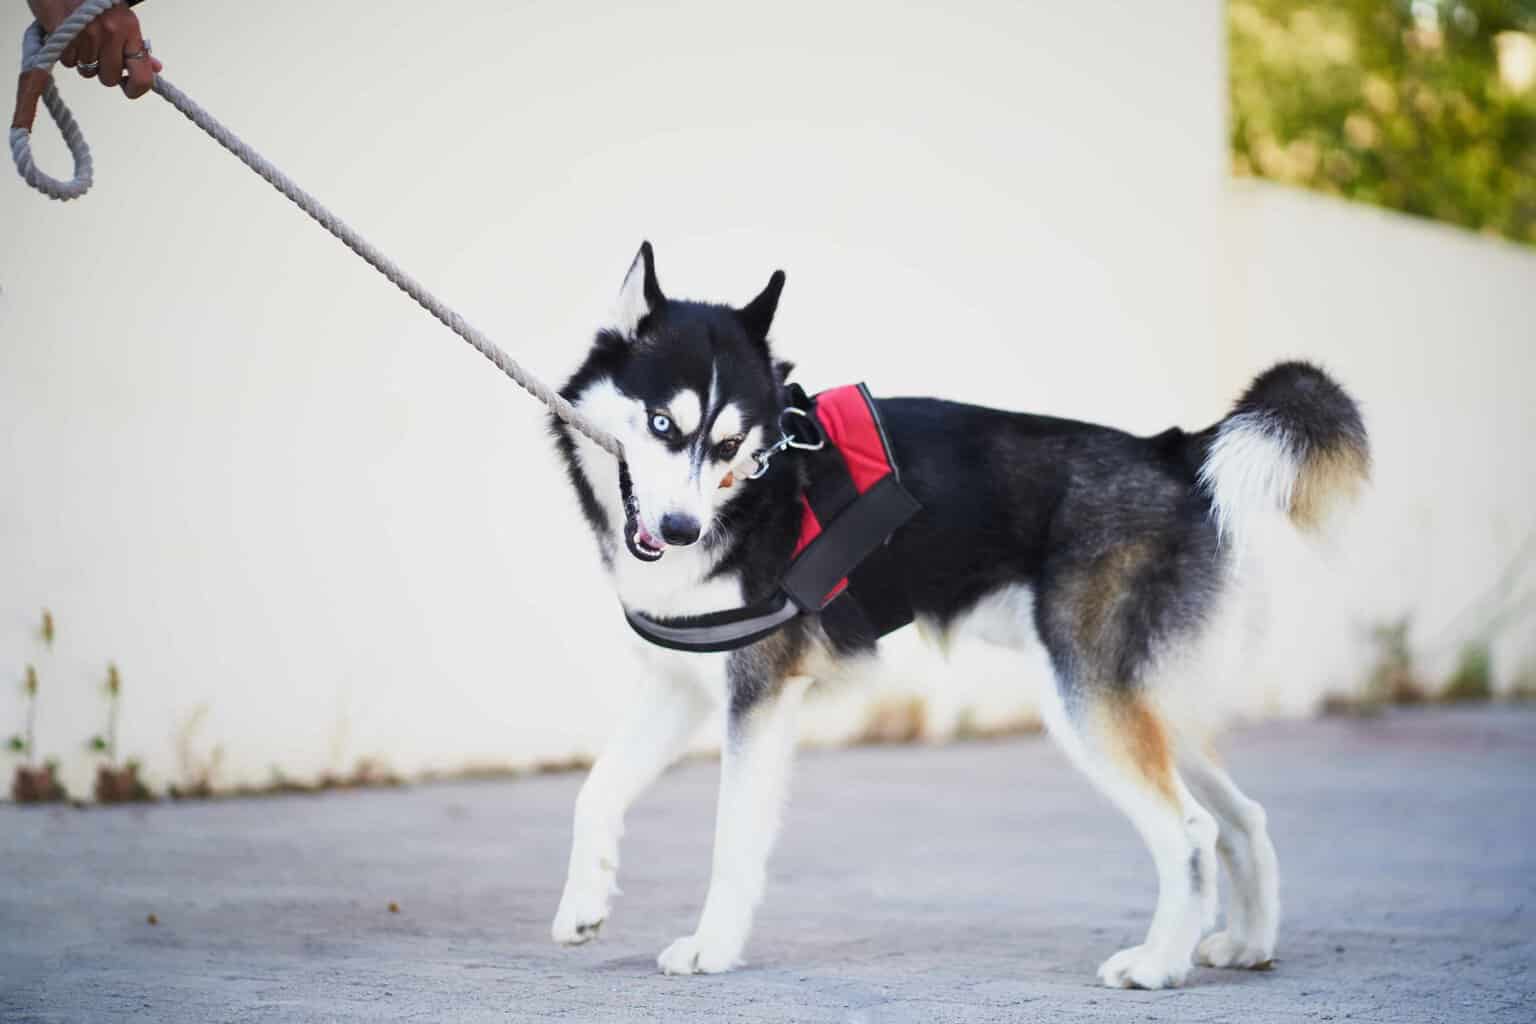 Owner pulls on Siberian Husky's leash. Aggressively pulling on your dog's leash to maintain control can backfire and stress out your dog.